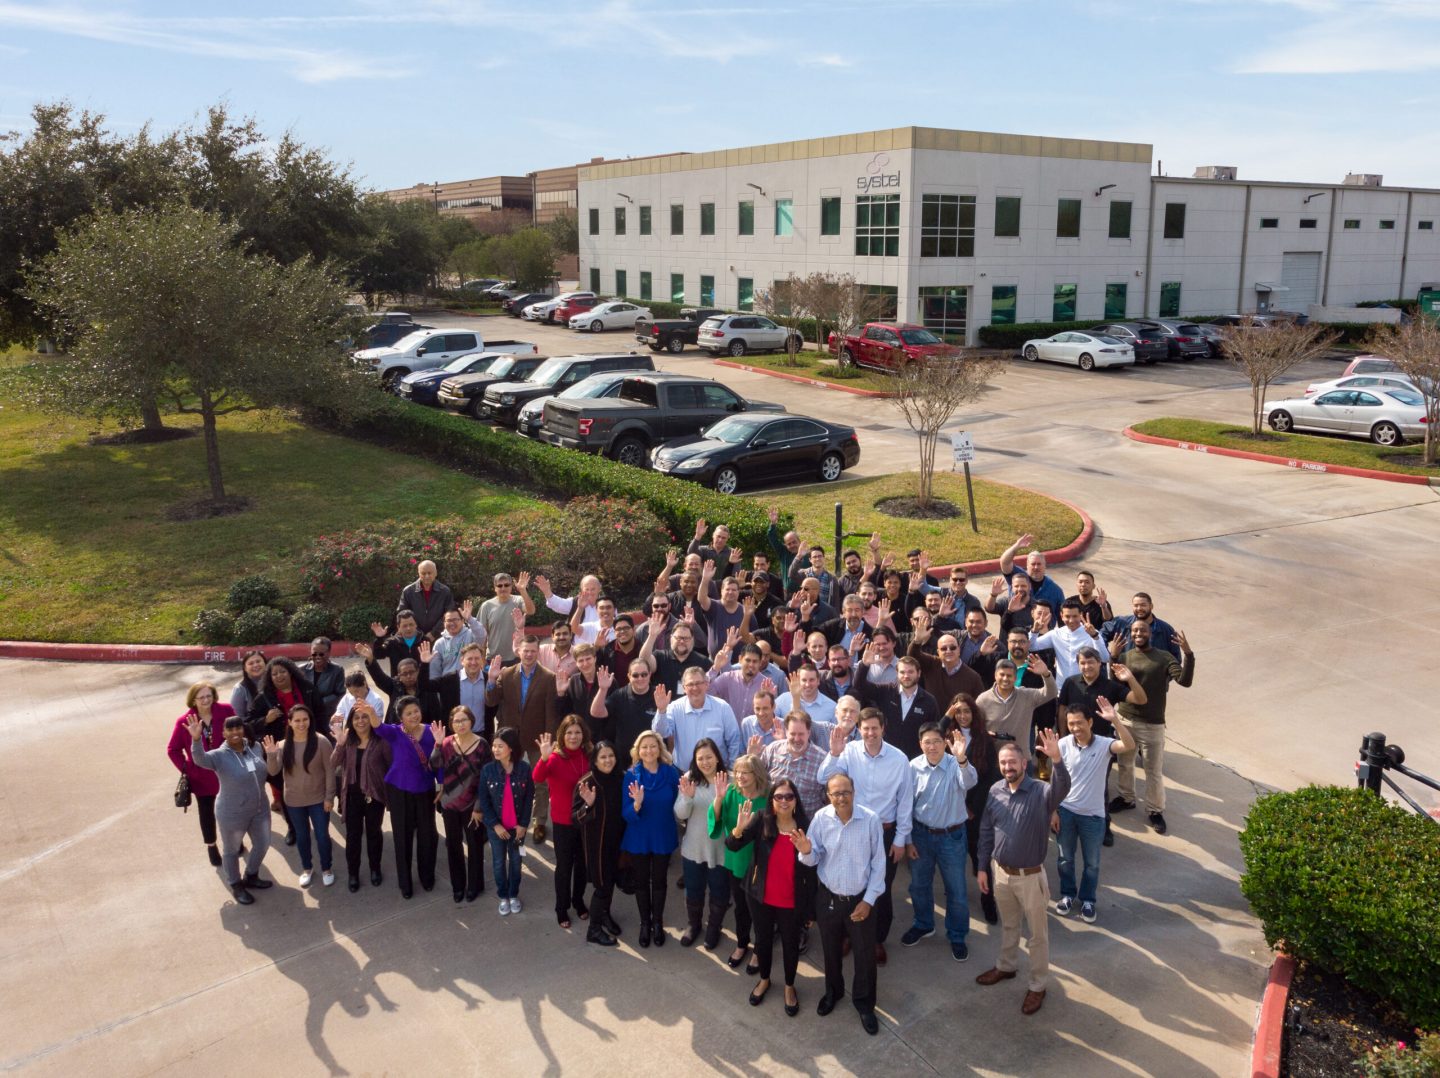 Systel's company photo for 2019